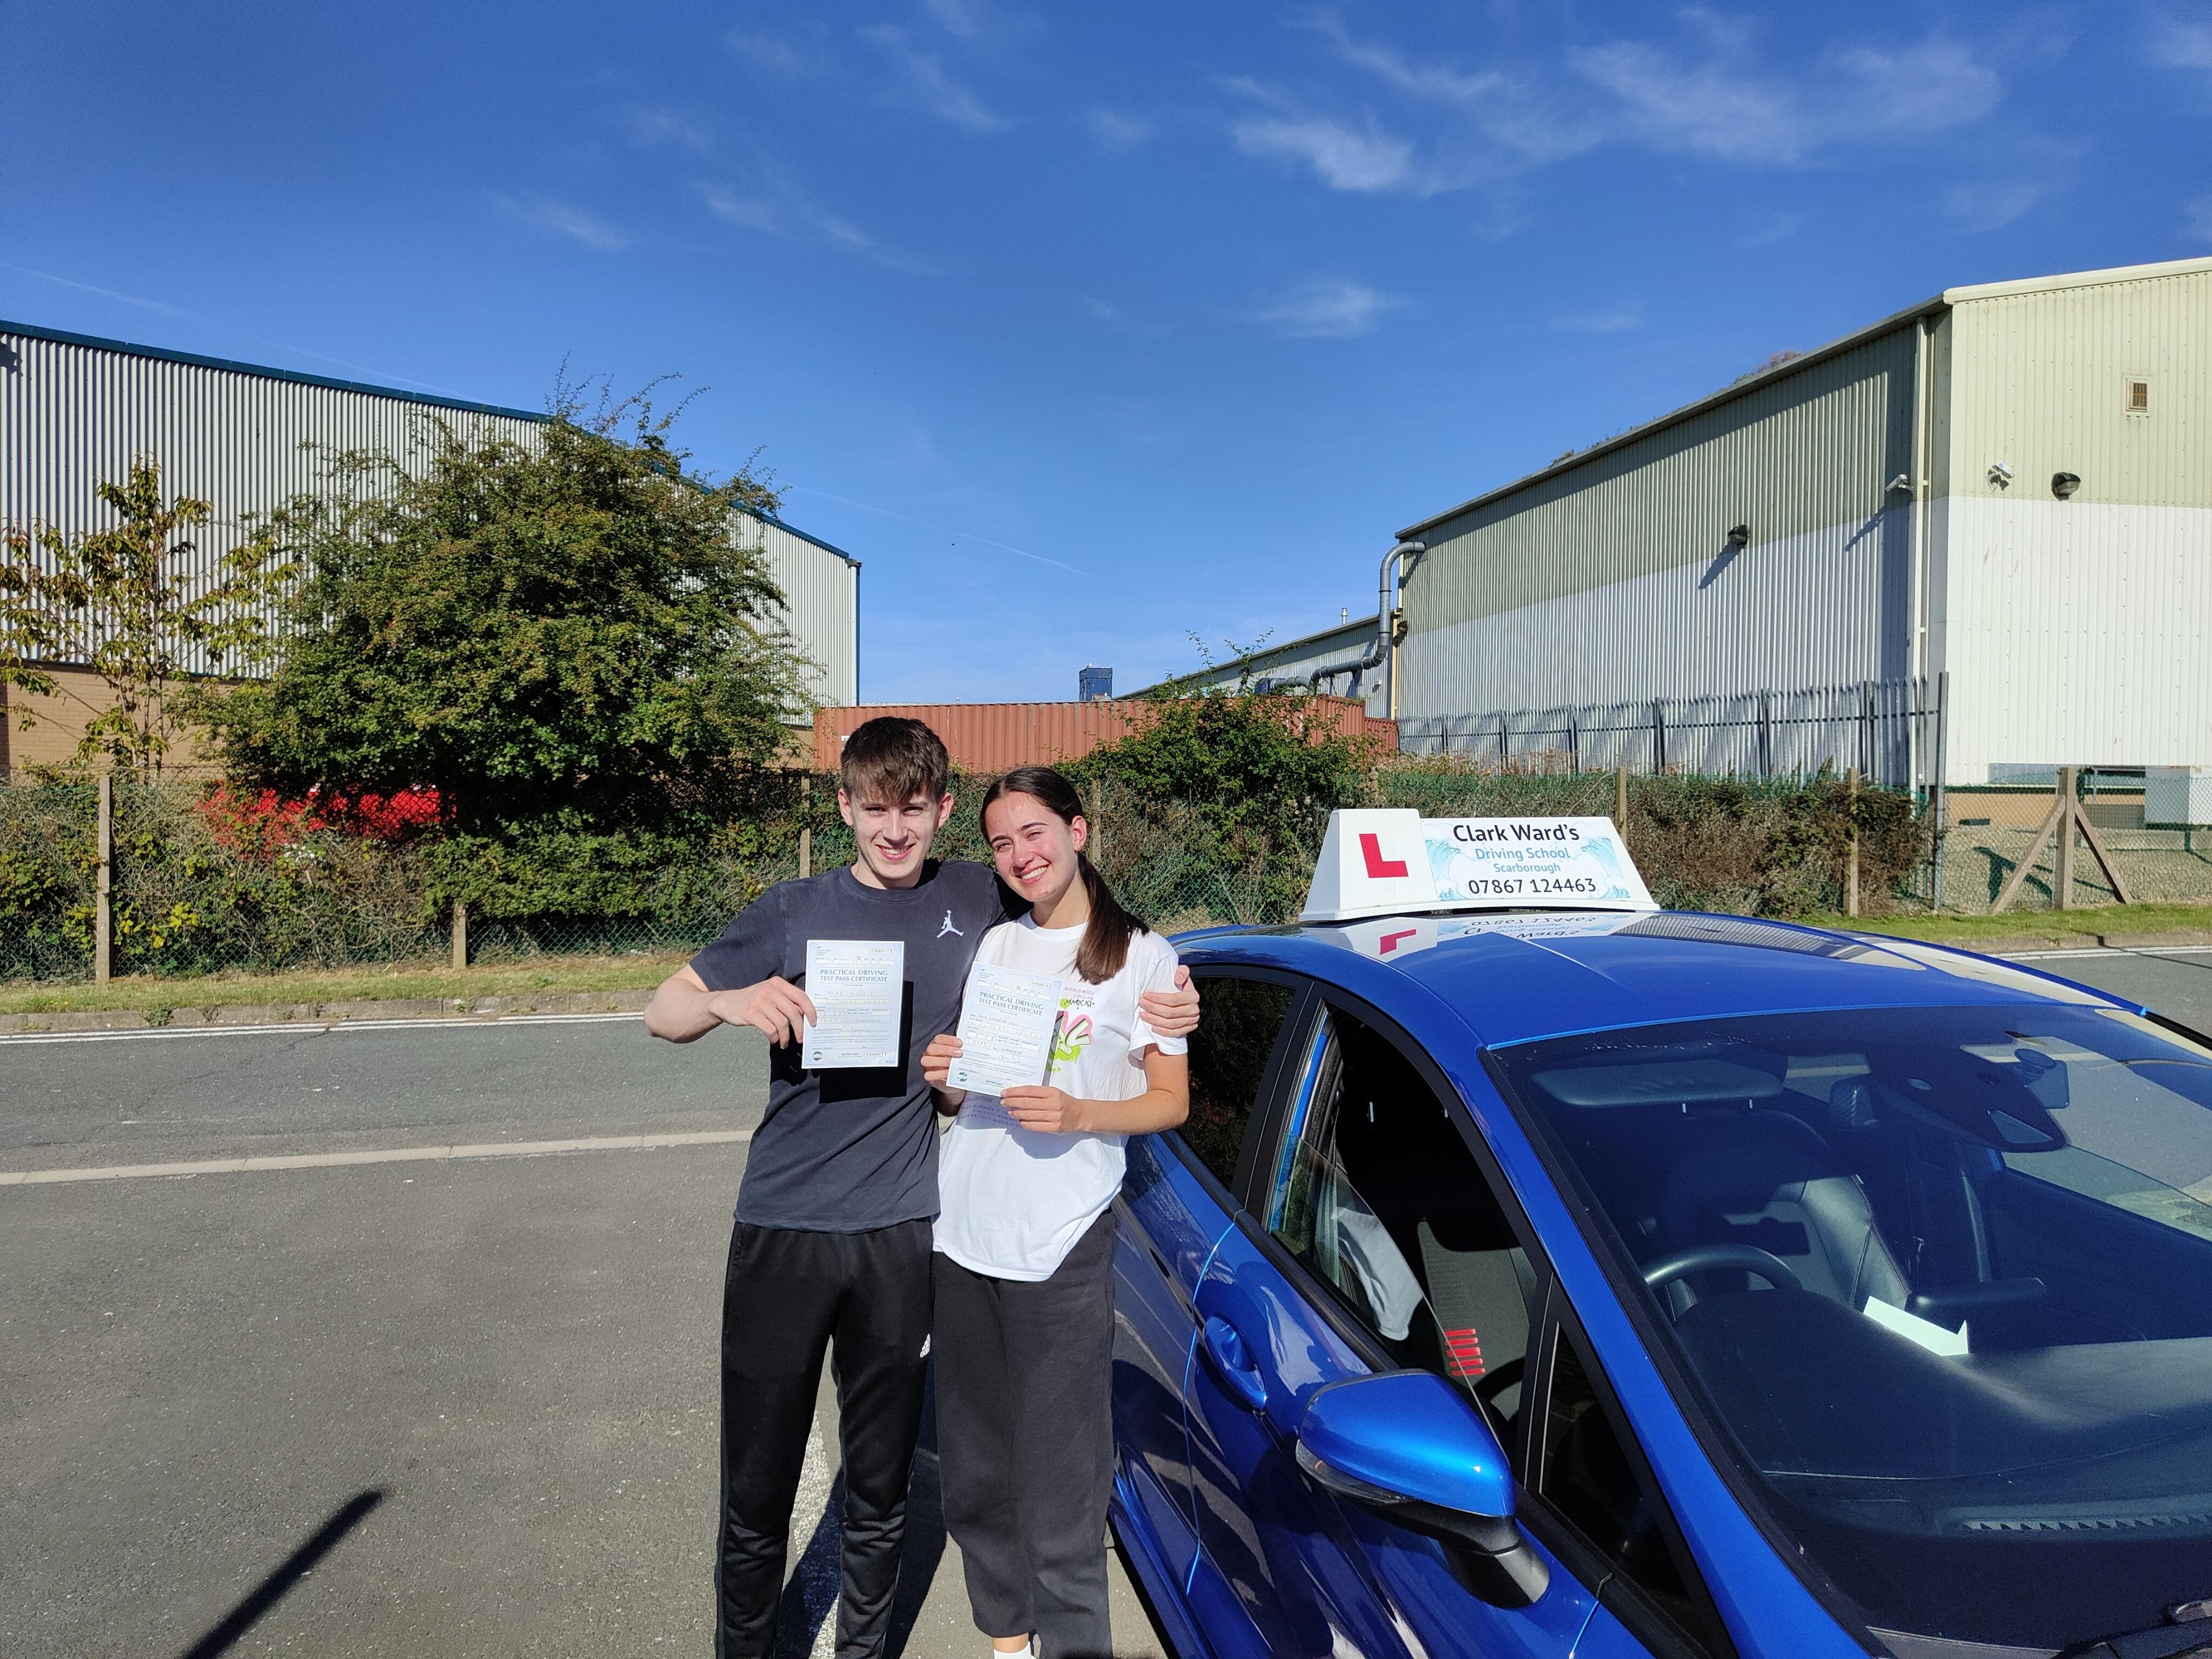 Twins Alfie and Emma Willis passed their driving test at the same time